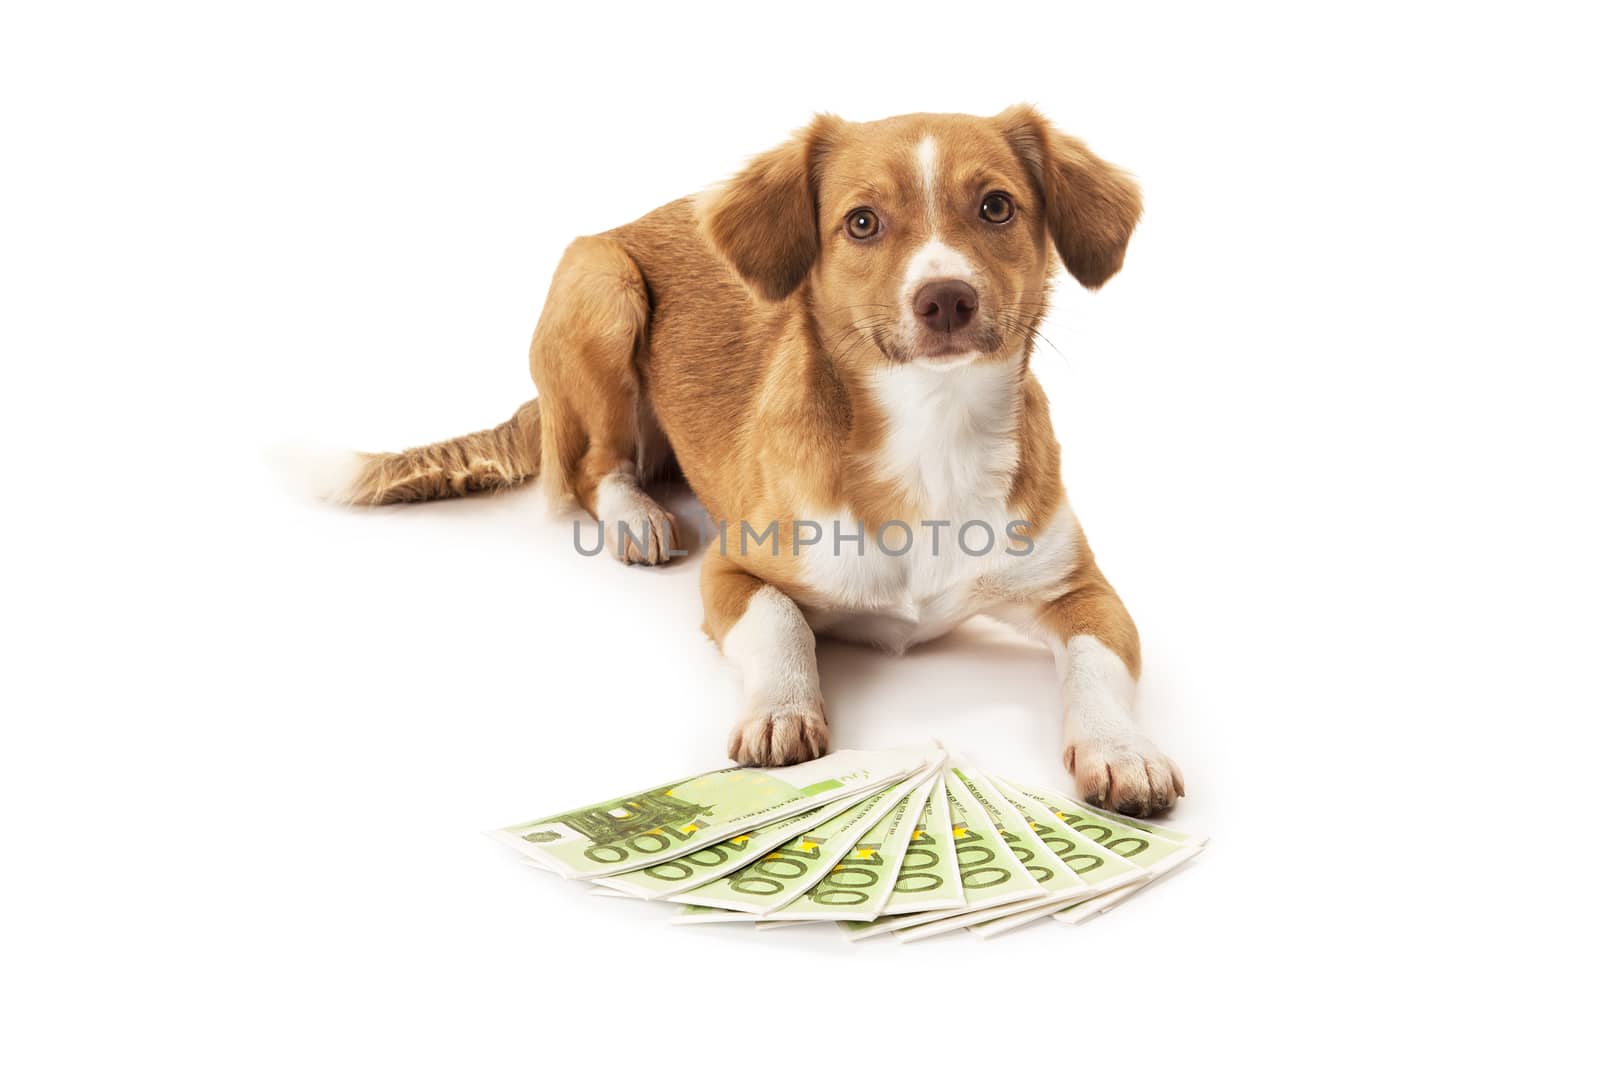 Portrait of dog in front of euro banknote over white background